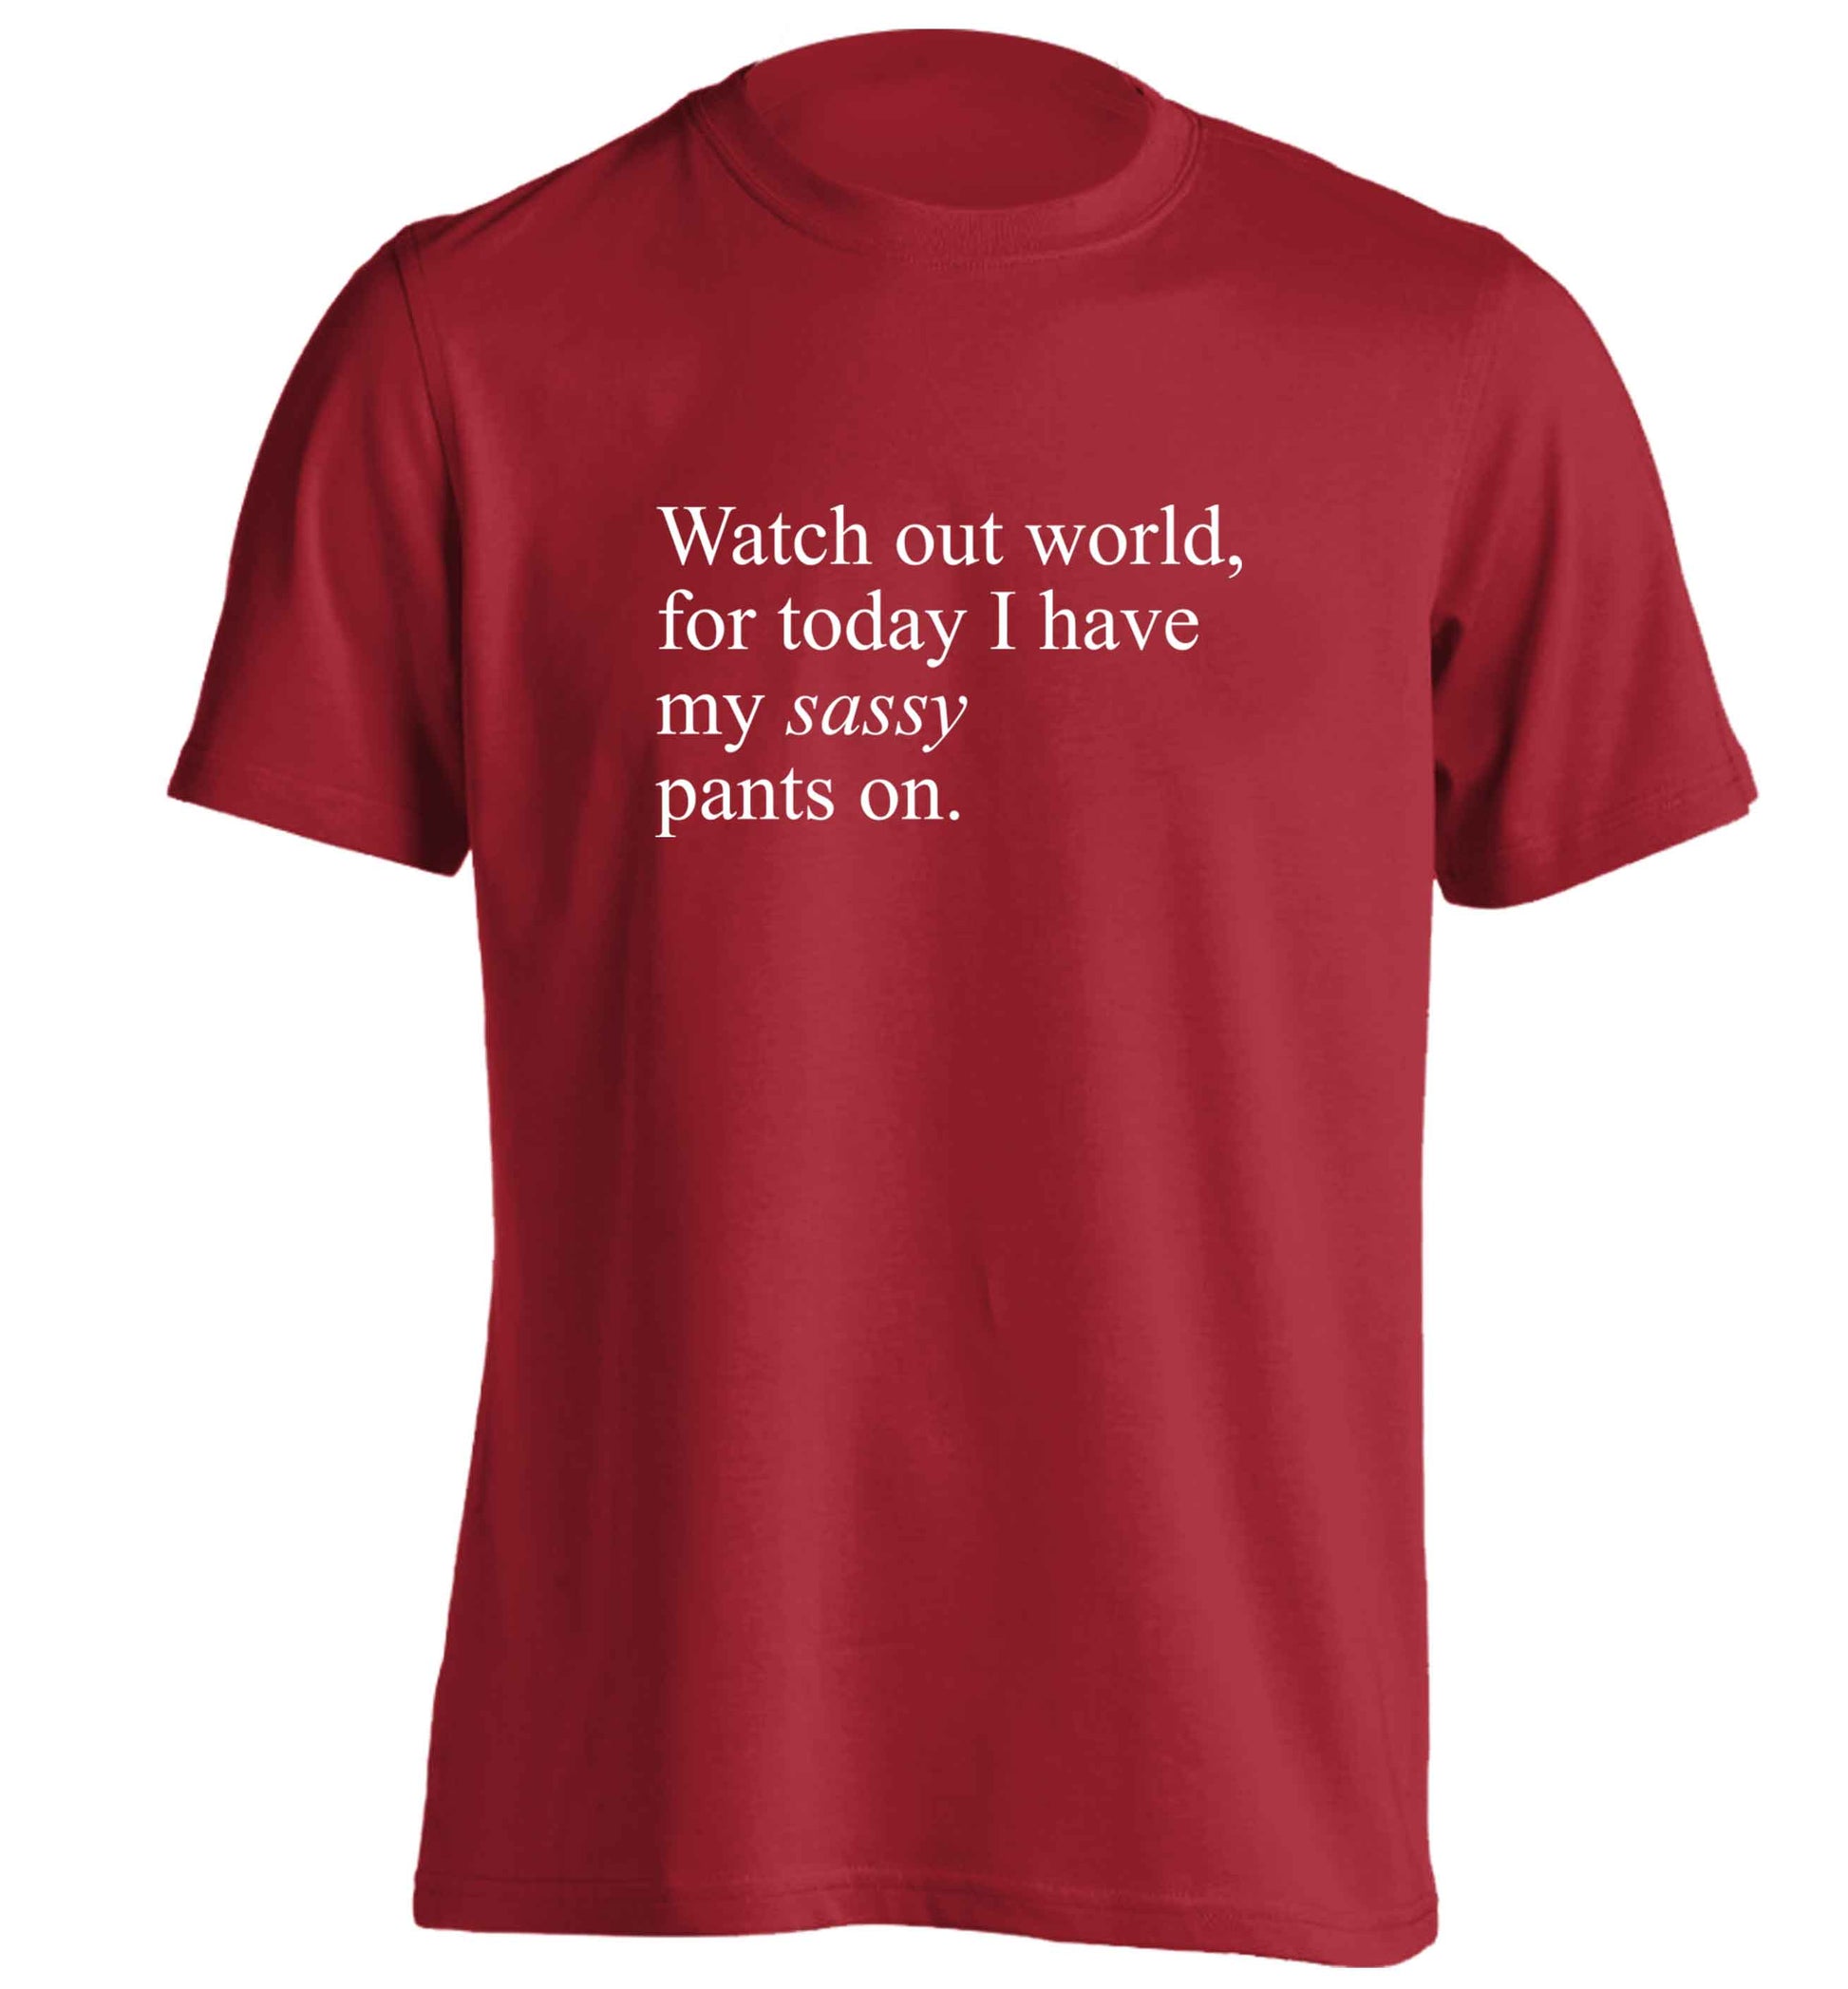 Watch out world for today I have my sassy pants on adults unisex red Tshirt 2XL